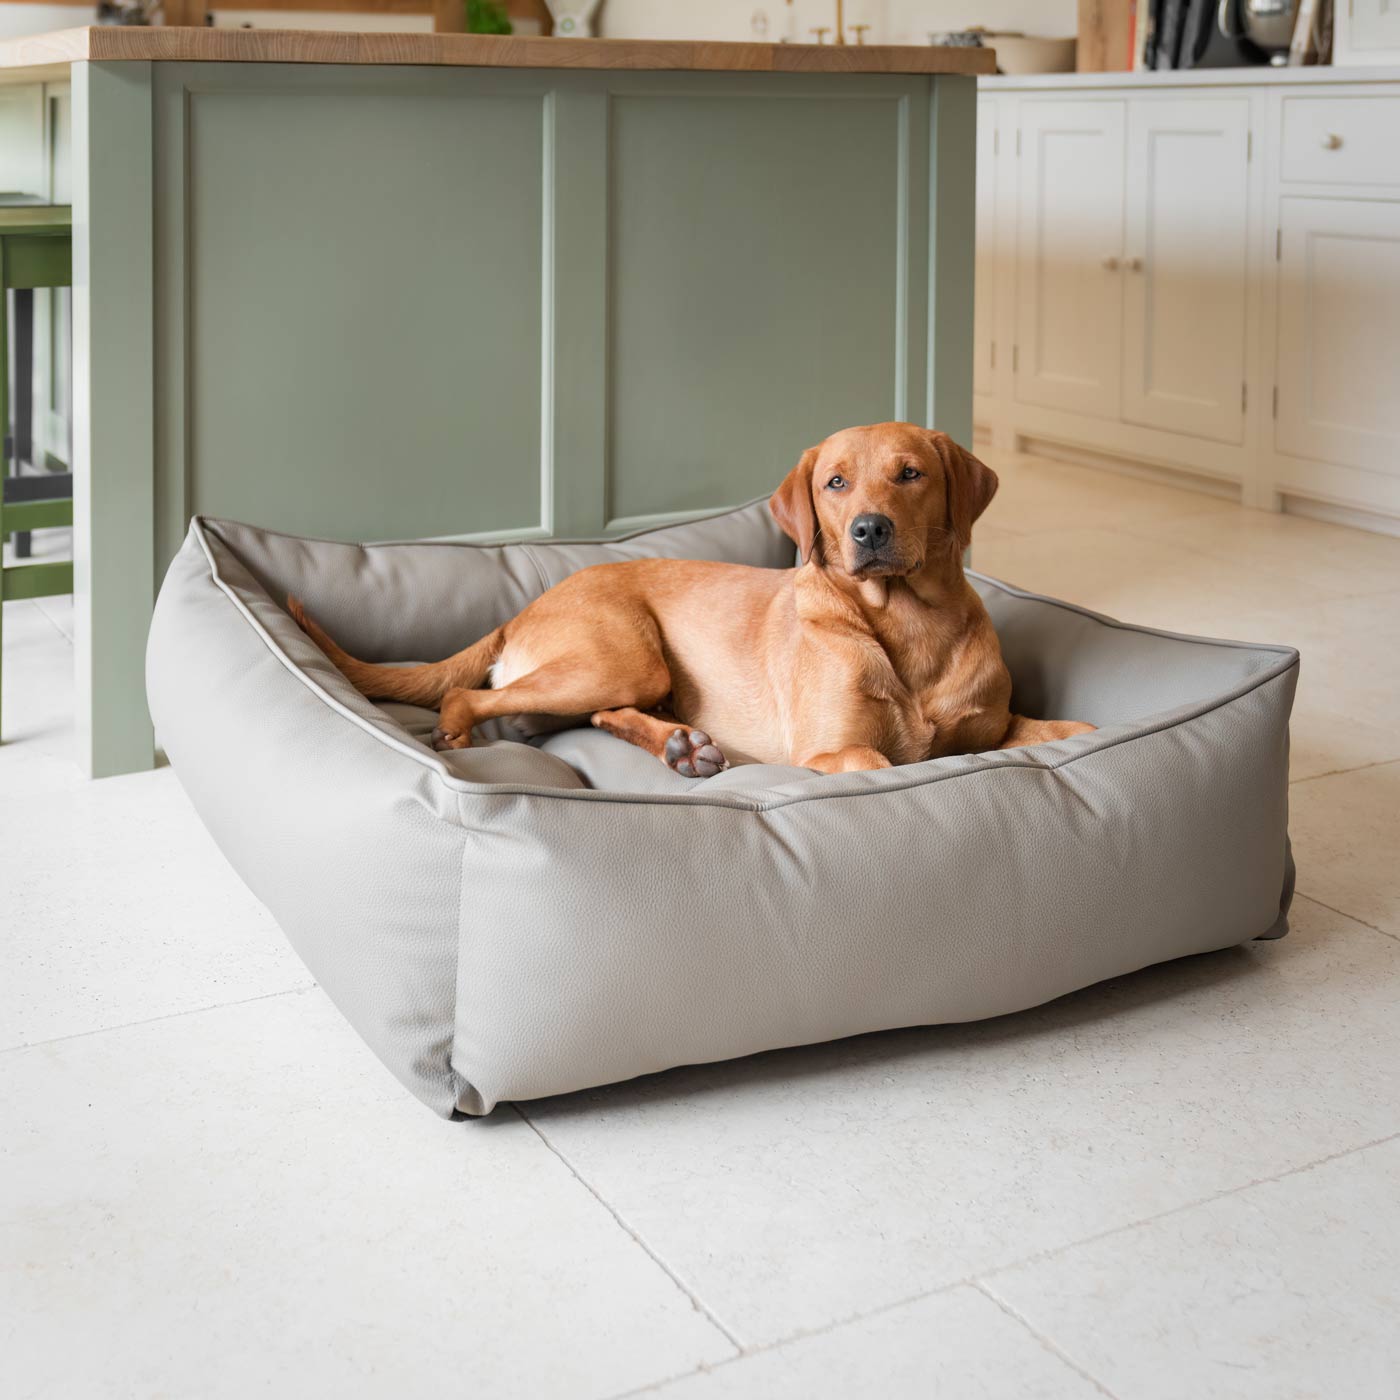 Luxury Handmade Box Bed in Rhino Tough Desert Faux Leather, in Camel, Perfect For Your Pets Nap Time! Available To Personalize at Lords & Labradors US